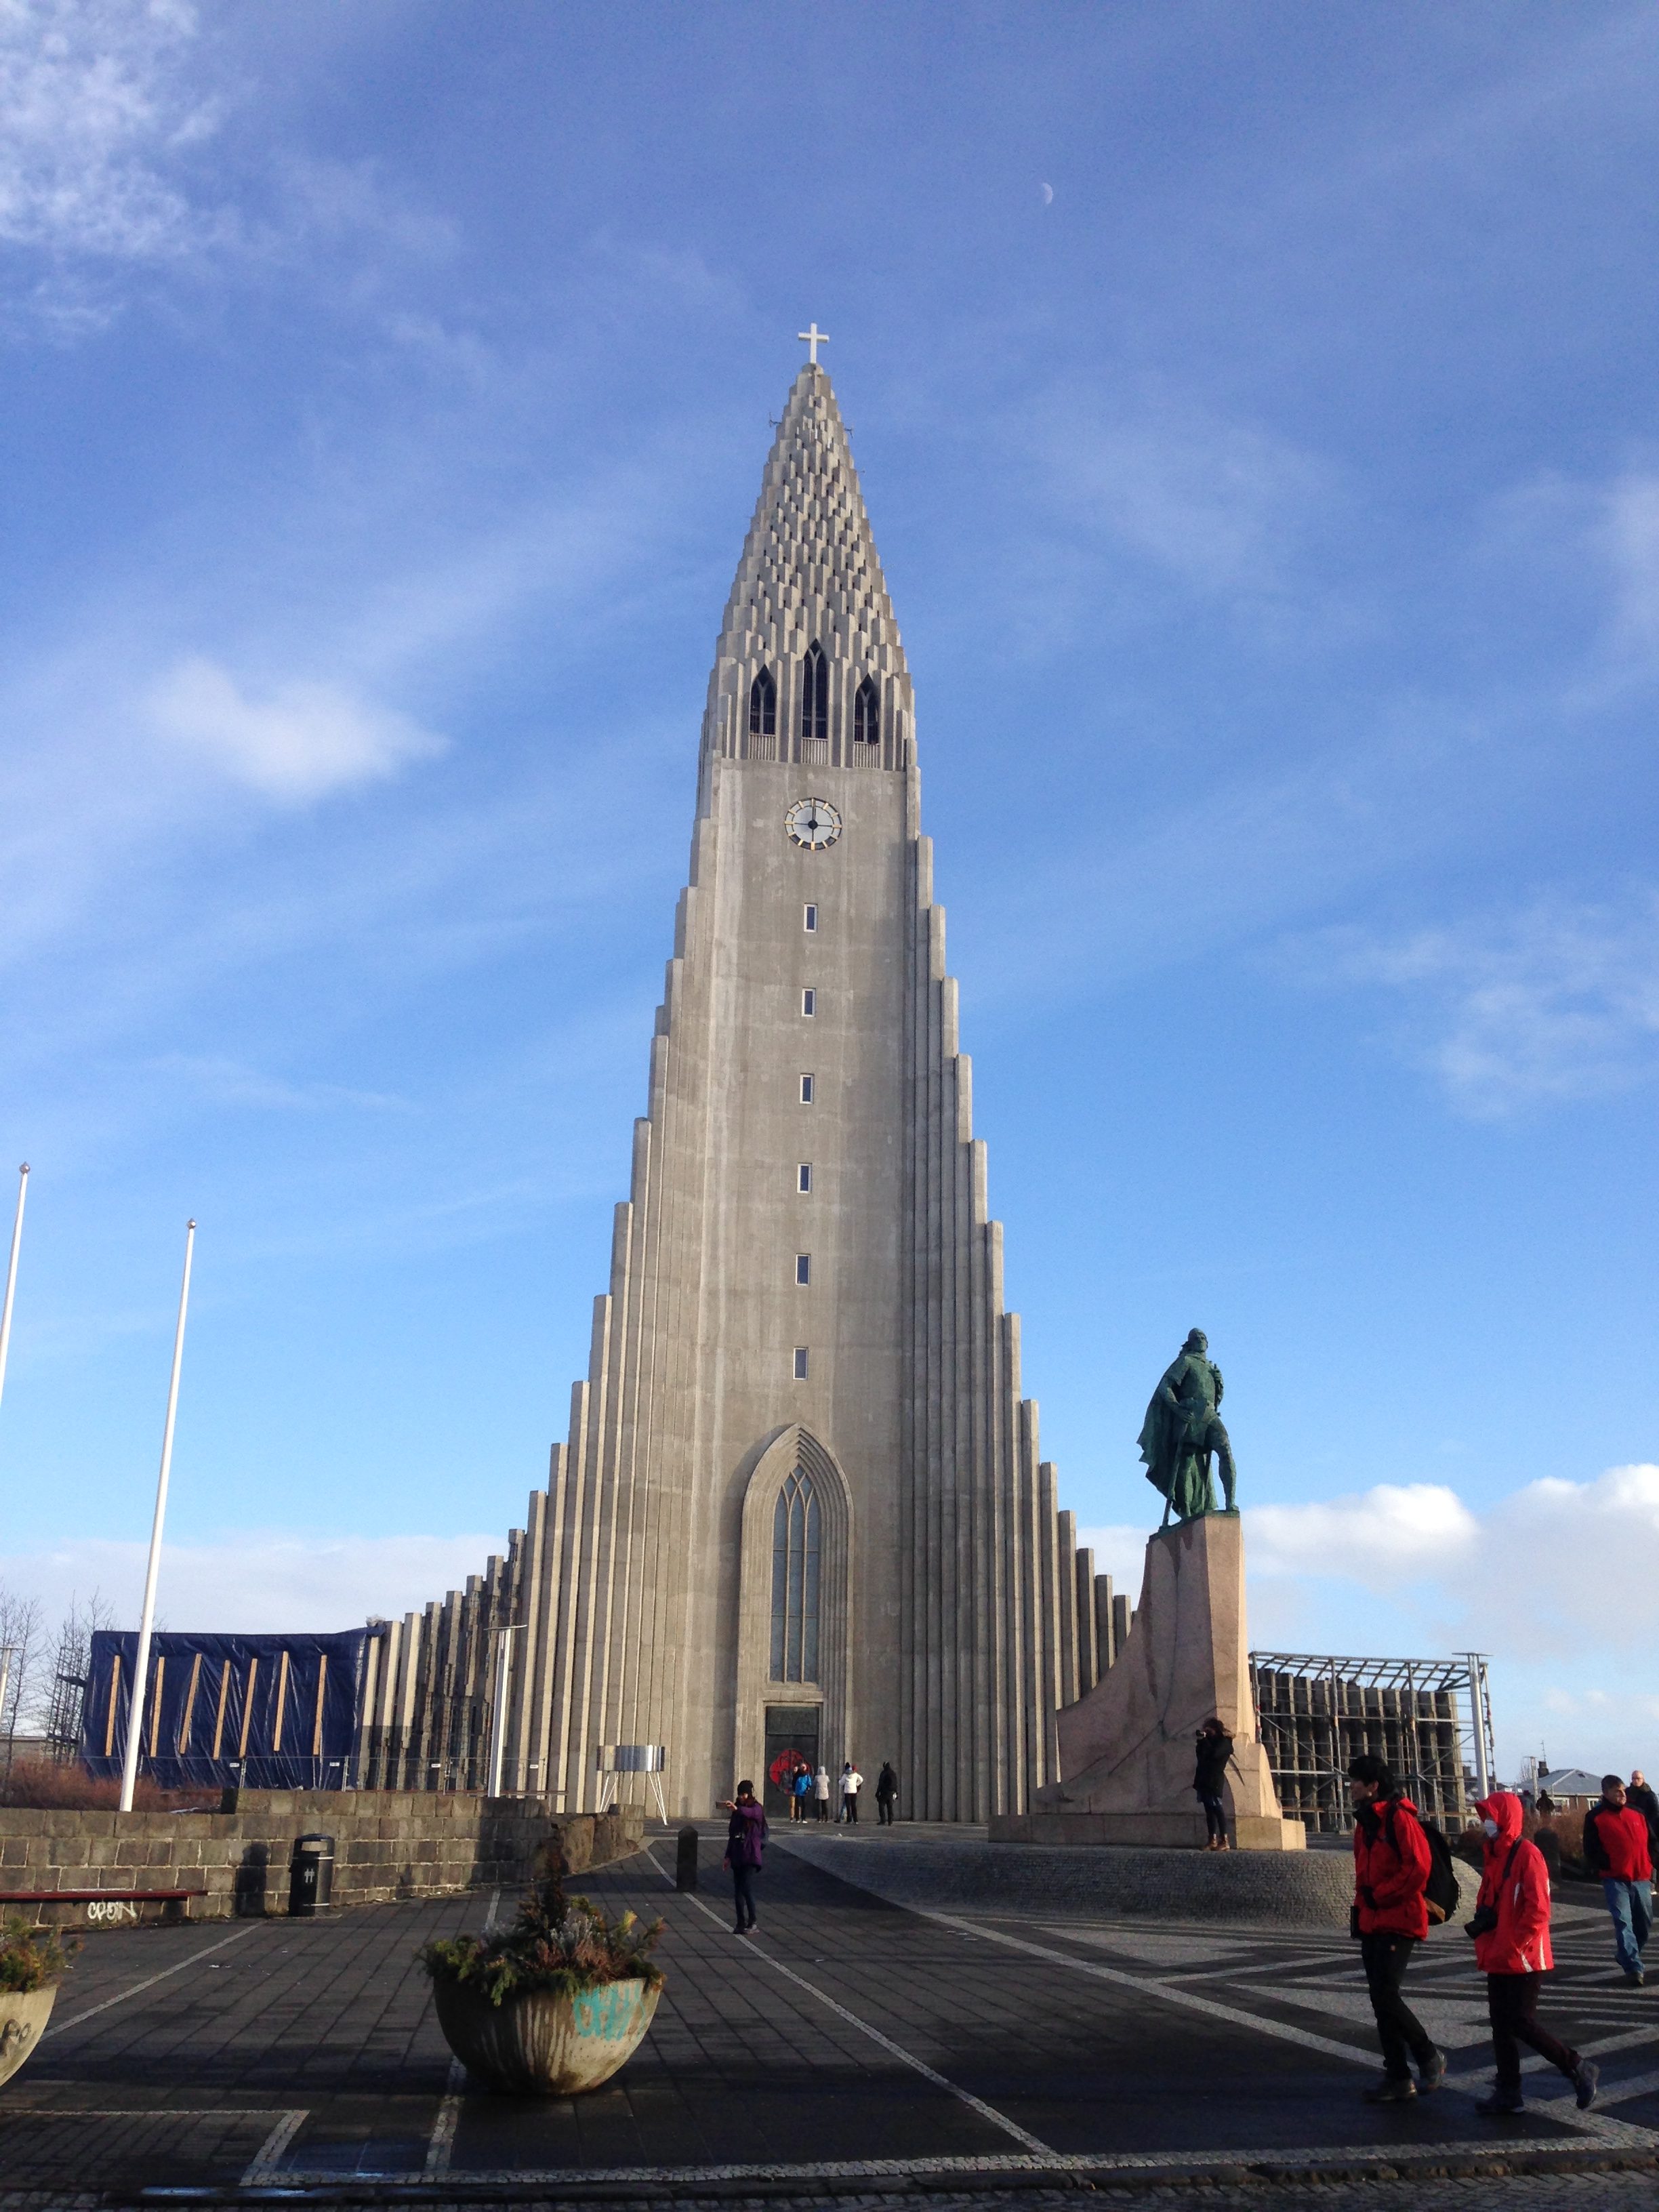 a tall building with a clock tower and people walking around with Hallgrímskirkja in the background